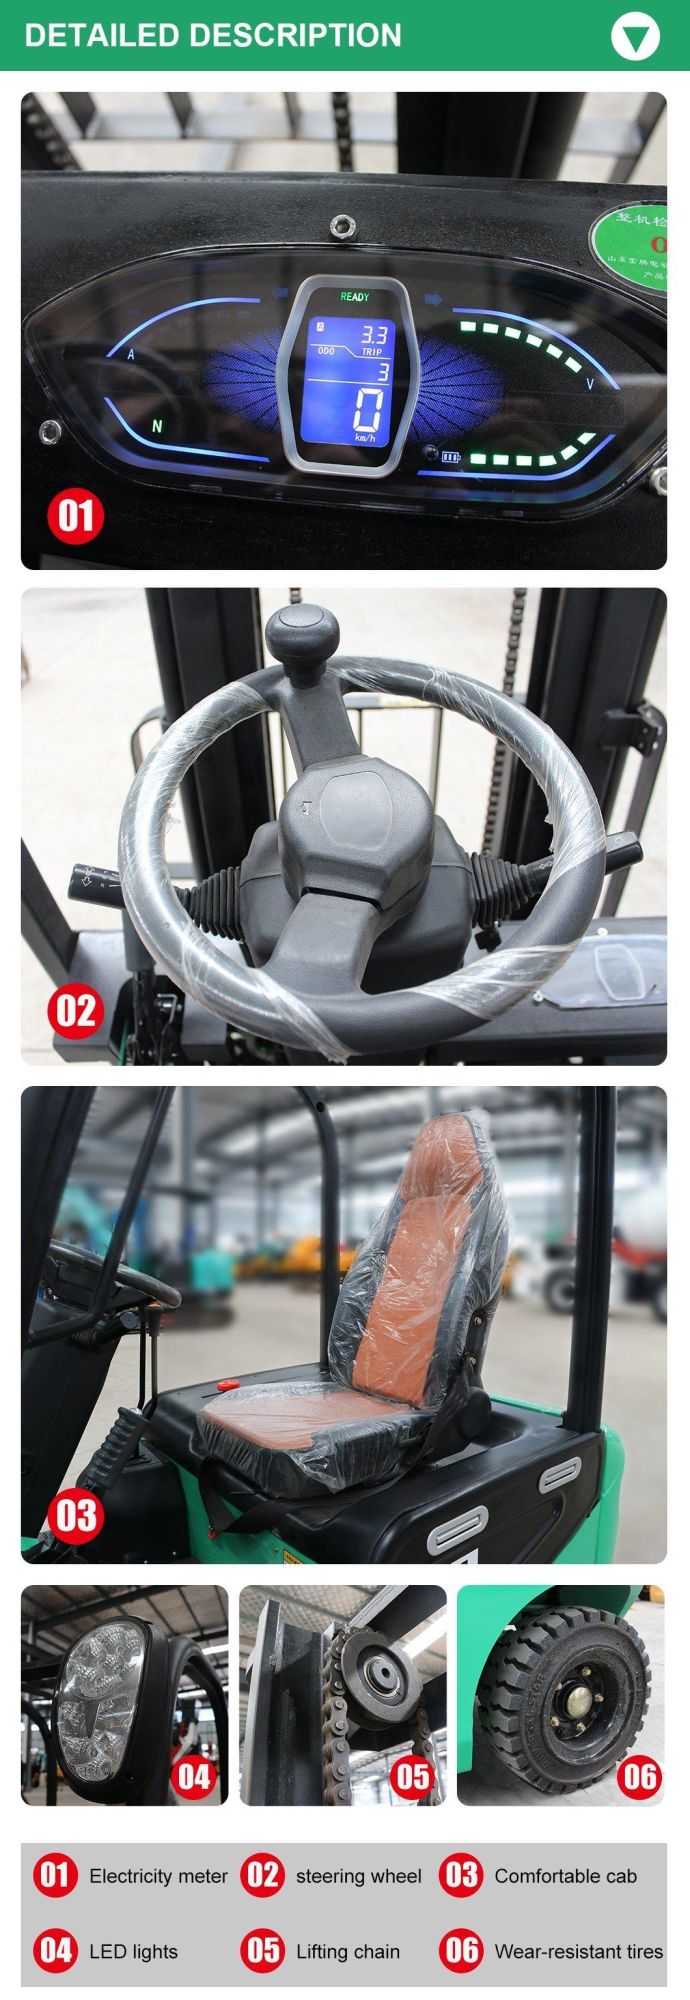 China Electric Forklift 1 Ton 1.5 Ton 2 Ton 3 Ton New Forklift Container Mast Side Shift 48V Forklift Electric Motor